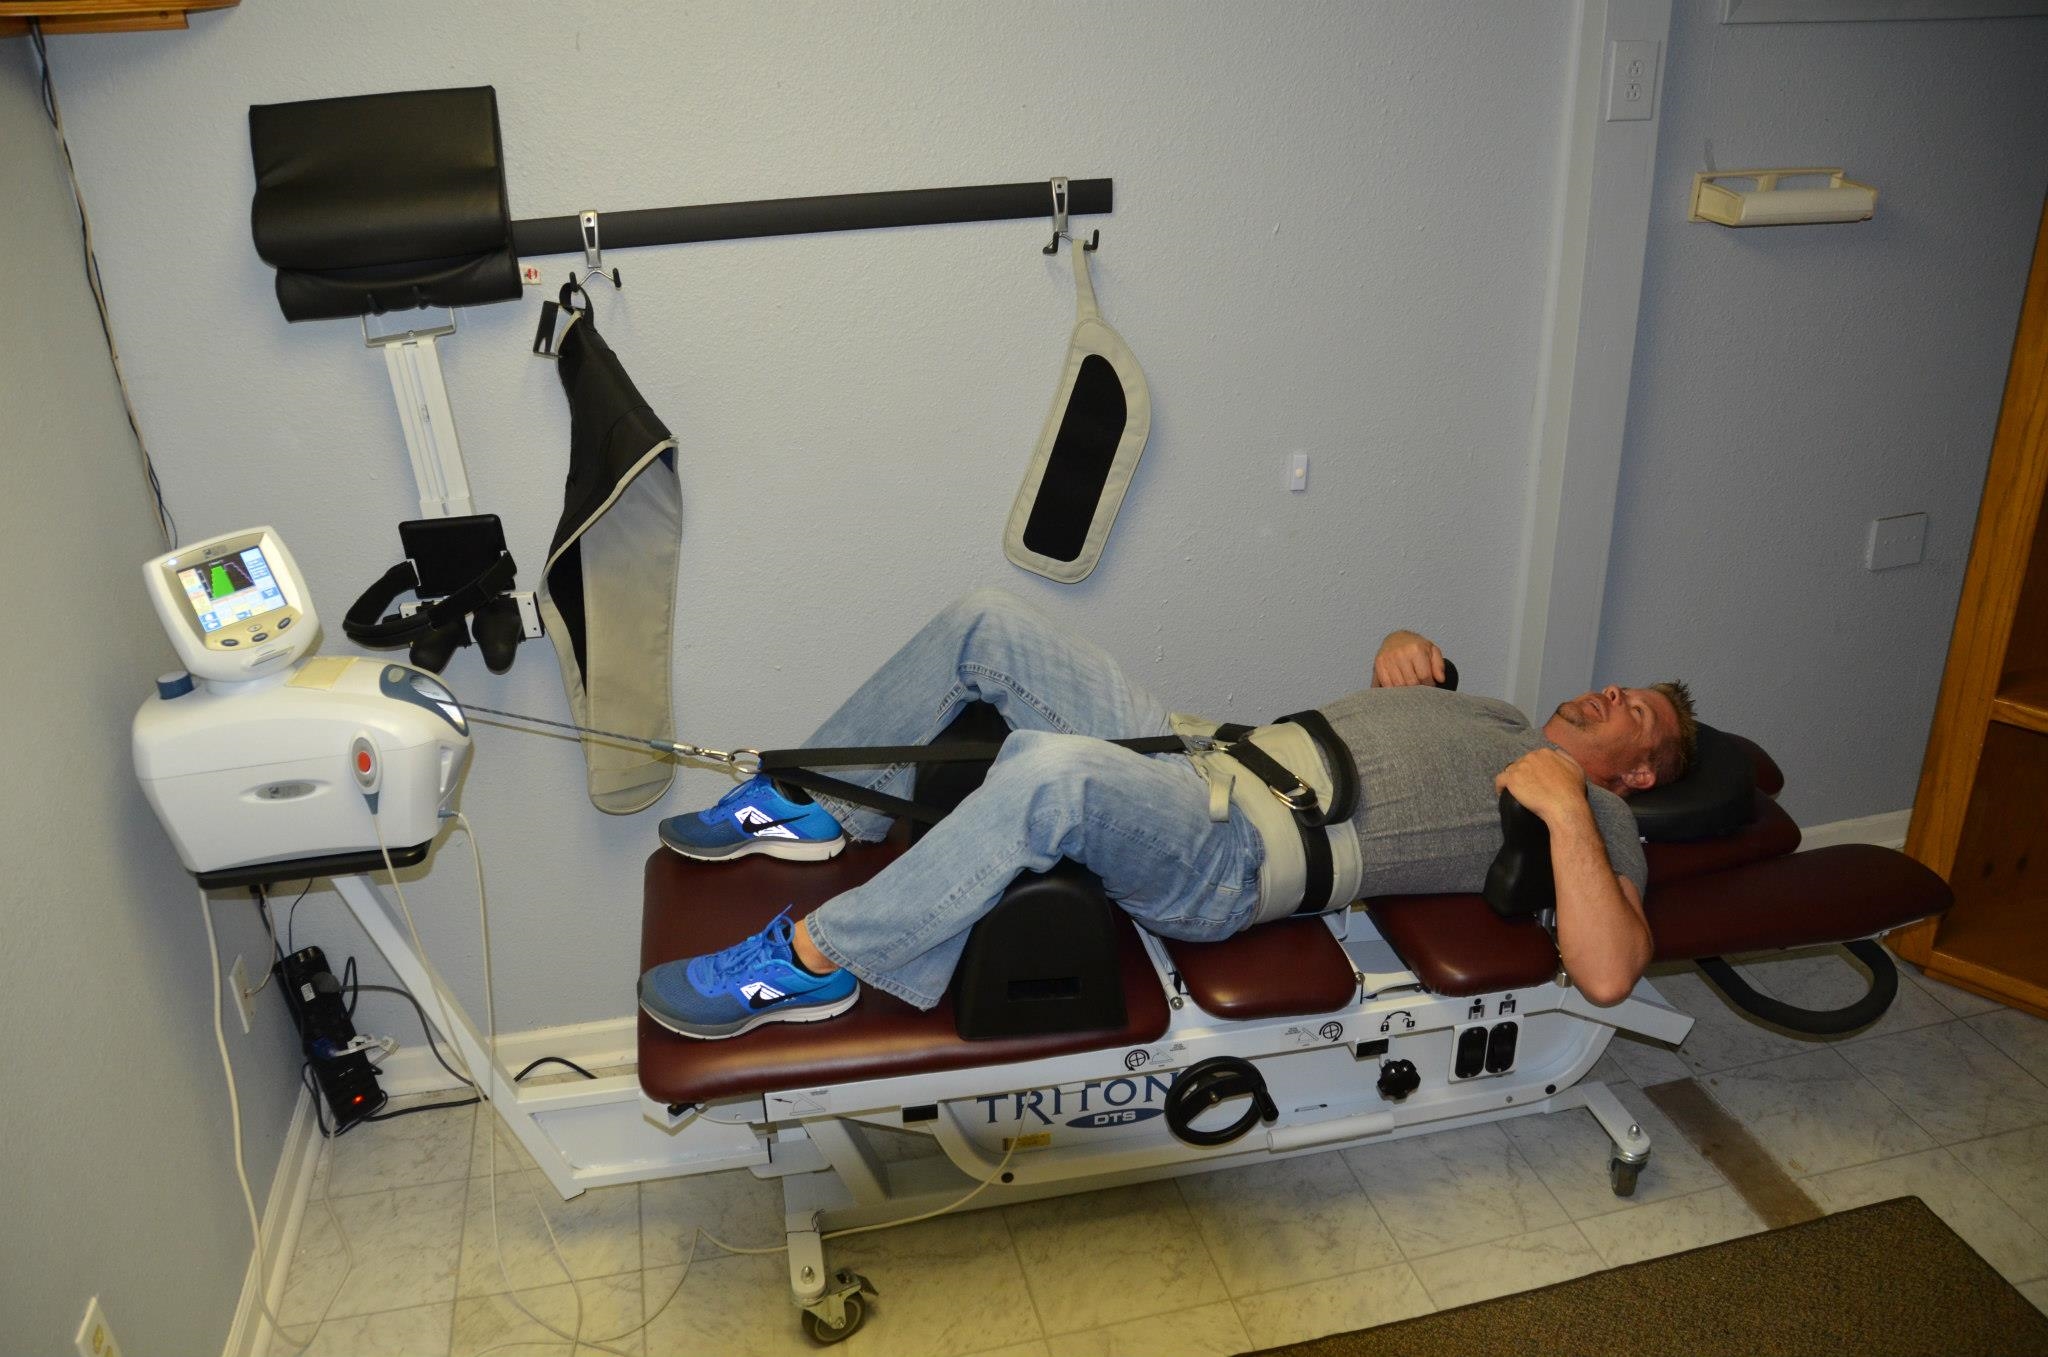 Benefits Of Spinal Decompression